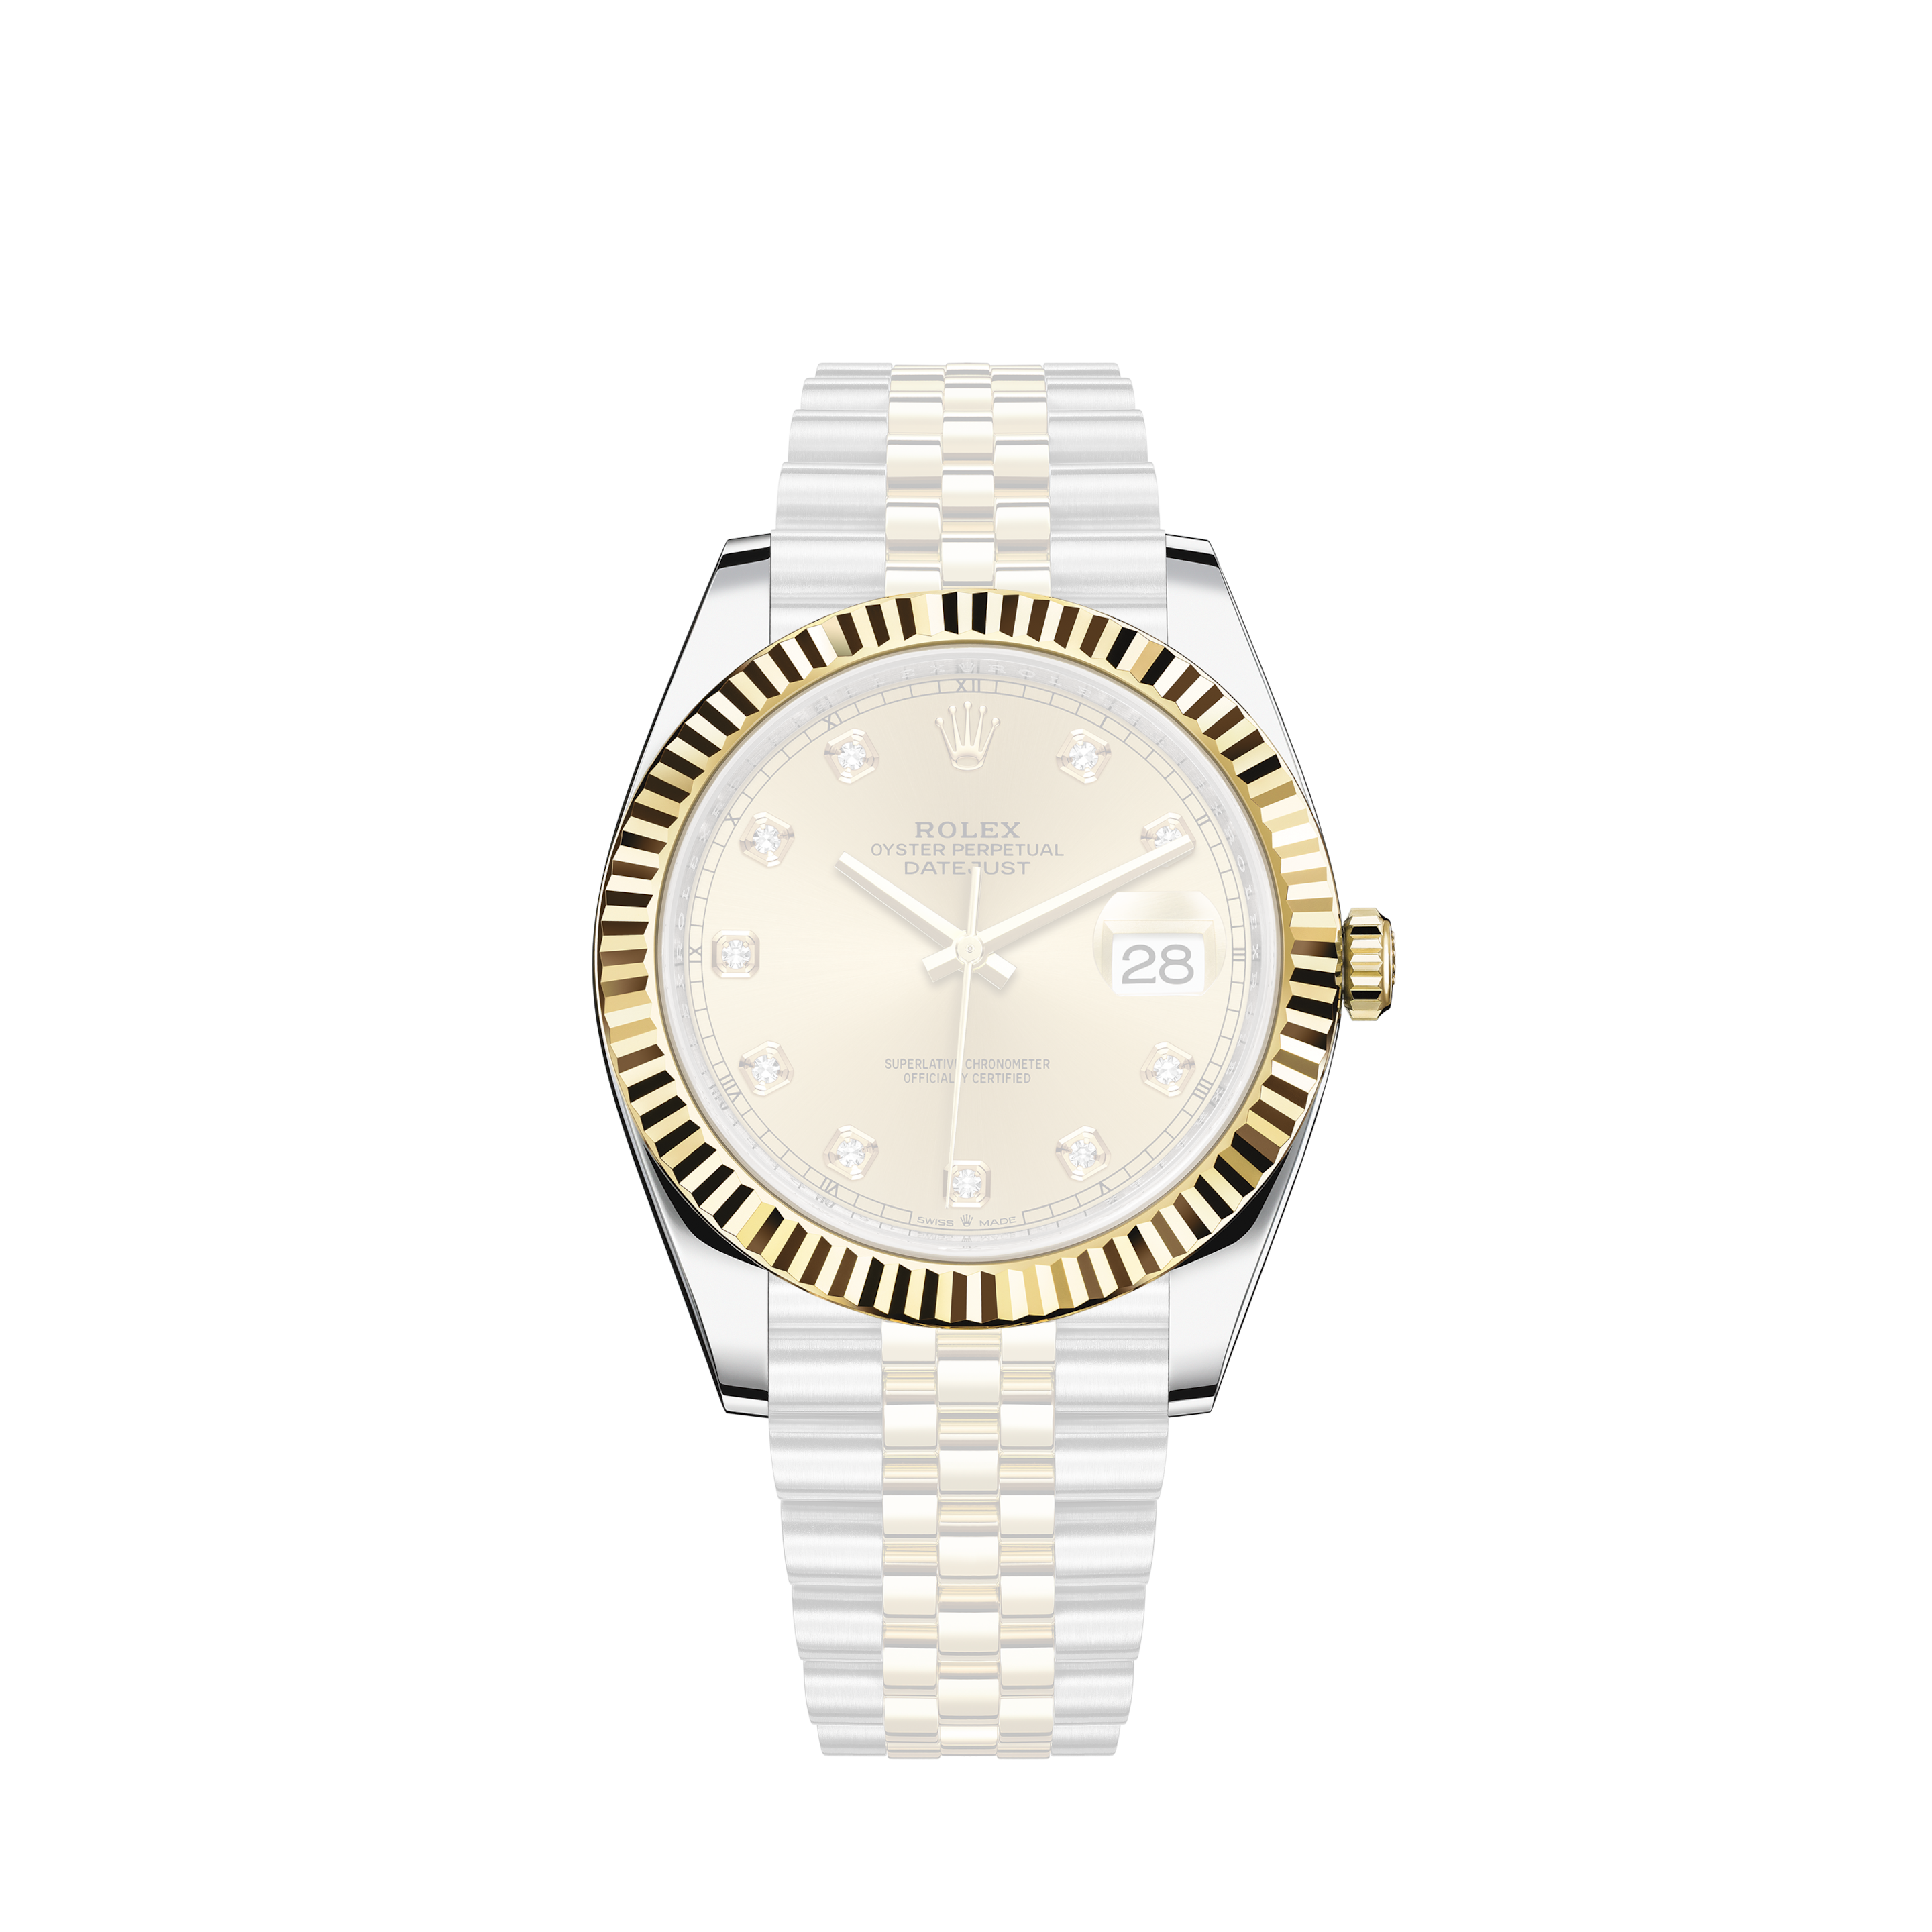 Rolex Datejust Midsize 31mm Stainless Steel Oyster Watch 2.25Ct Diamond BezelRolex Datejust Midsize 31mm Steel & 18k Gold Black Dial